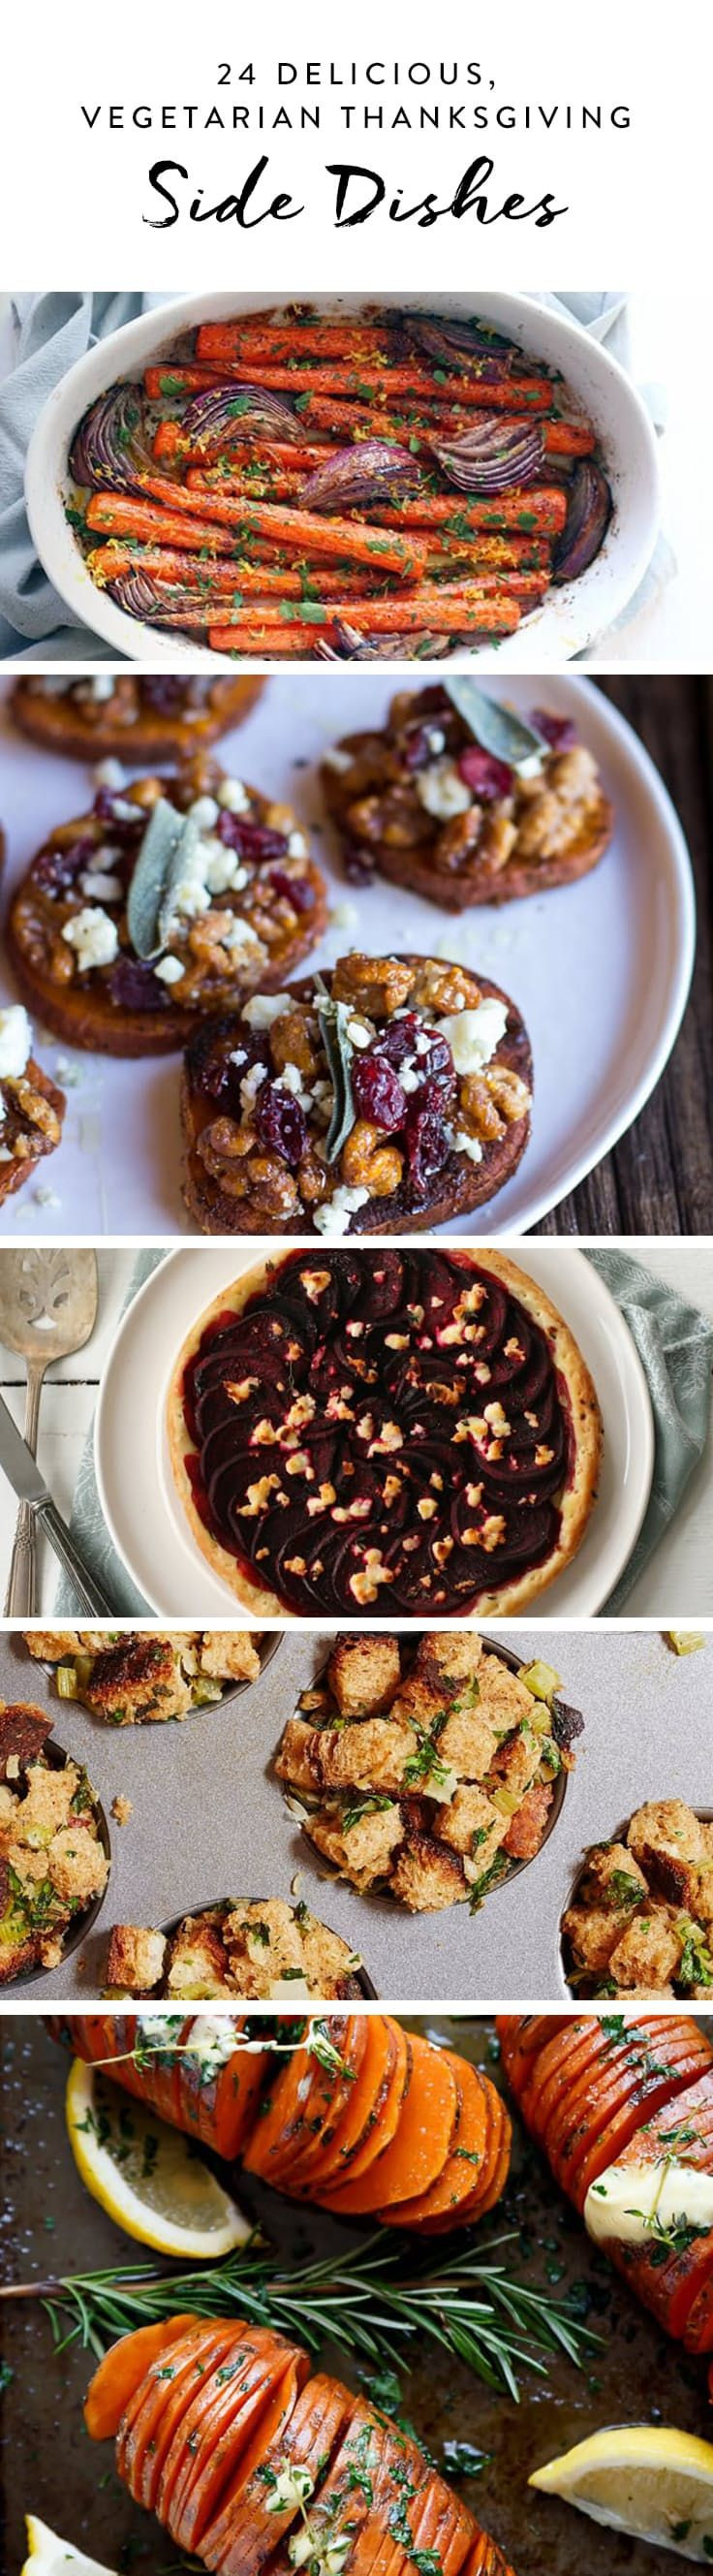 Vegetarian Thanksgiving Side Dishes
 17 Best ideas about Thanksgiving Side Dishes on Pinterest